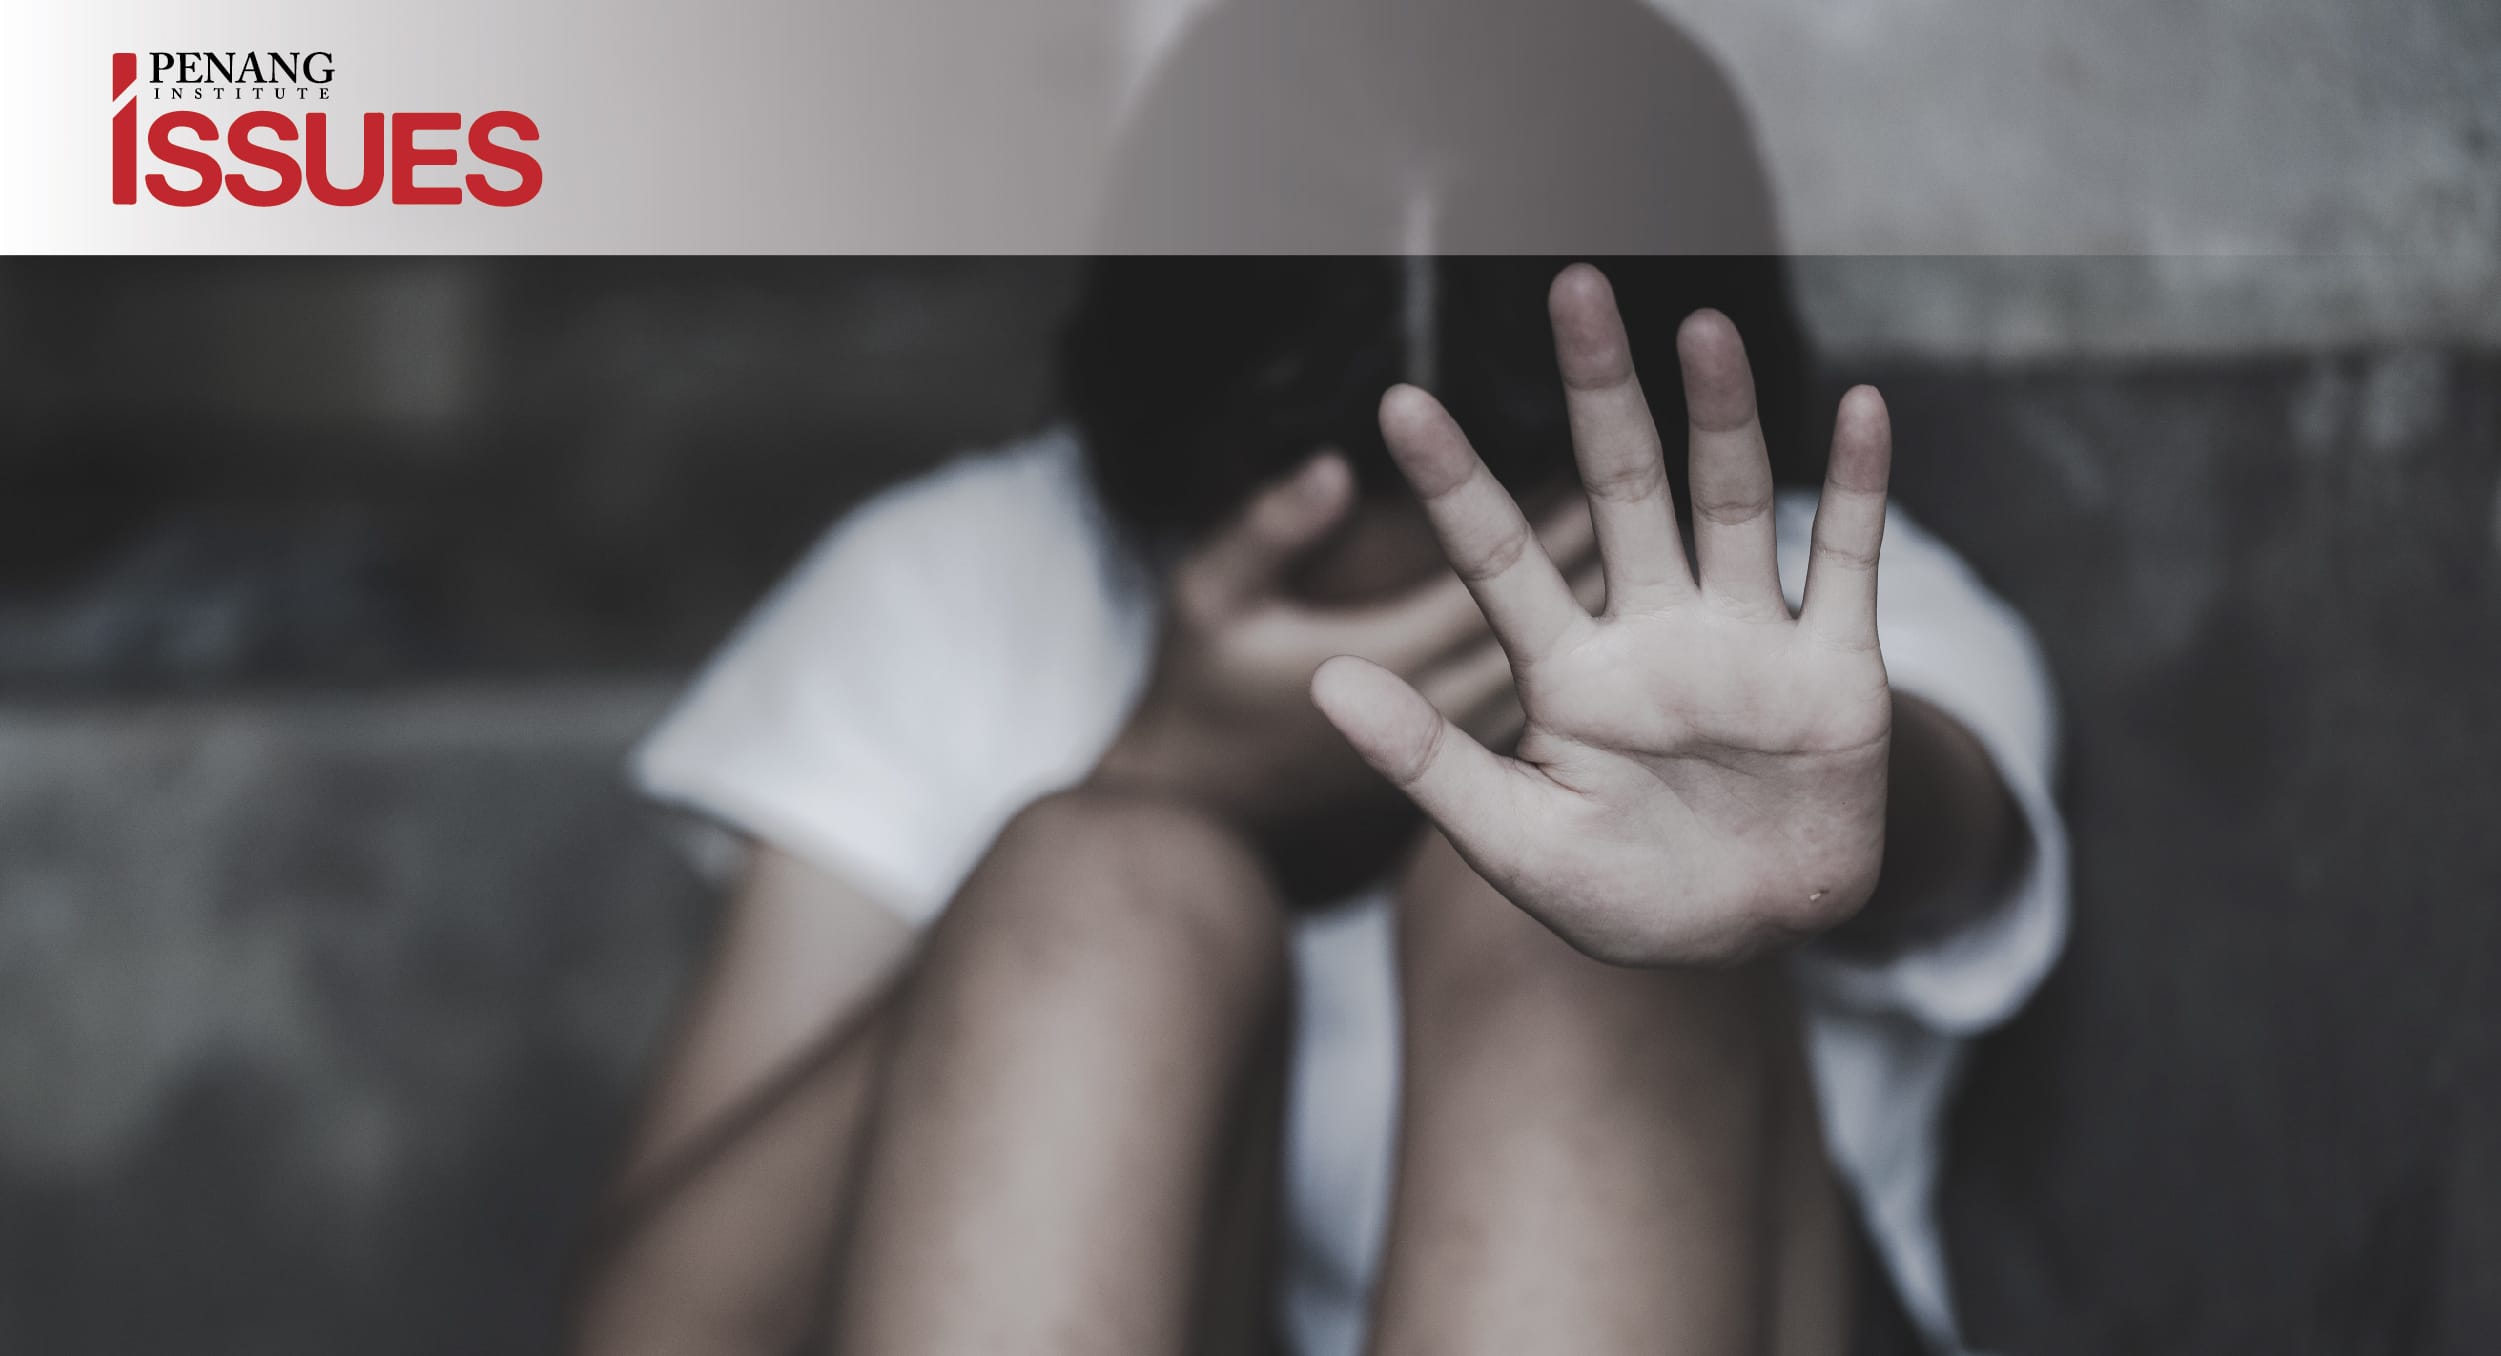 Indian School Girl Sex Video And Blackmail Rape - Strengthening Preventive Measures against Child Sexual Abuse in Malaysia â€“  Penang Institute